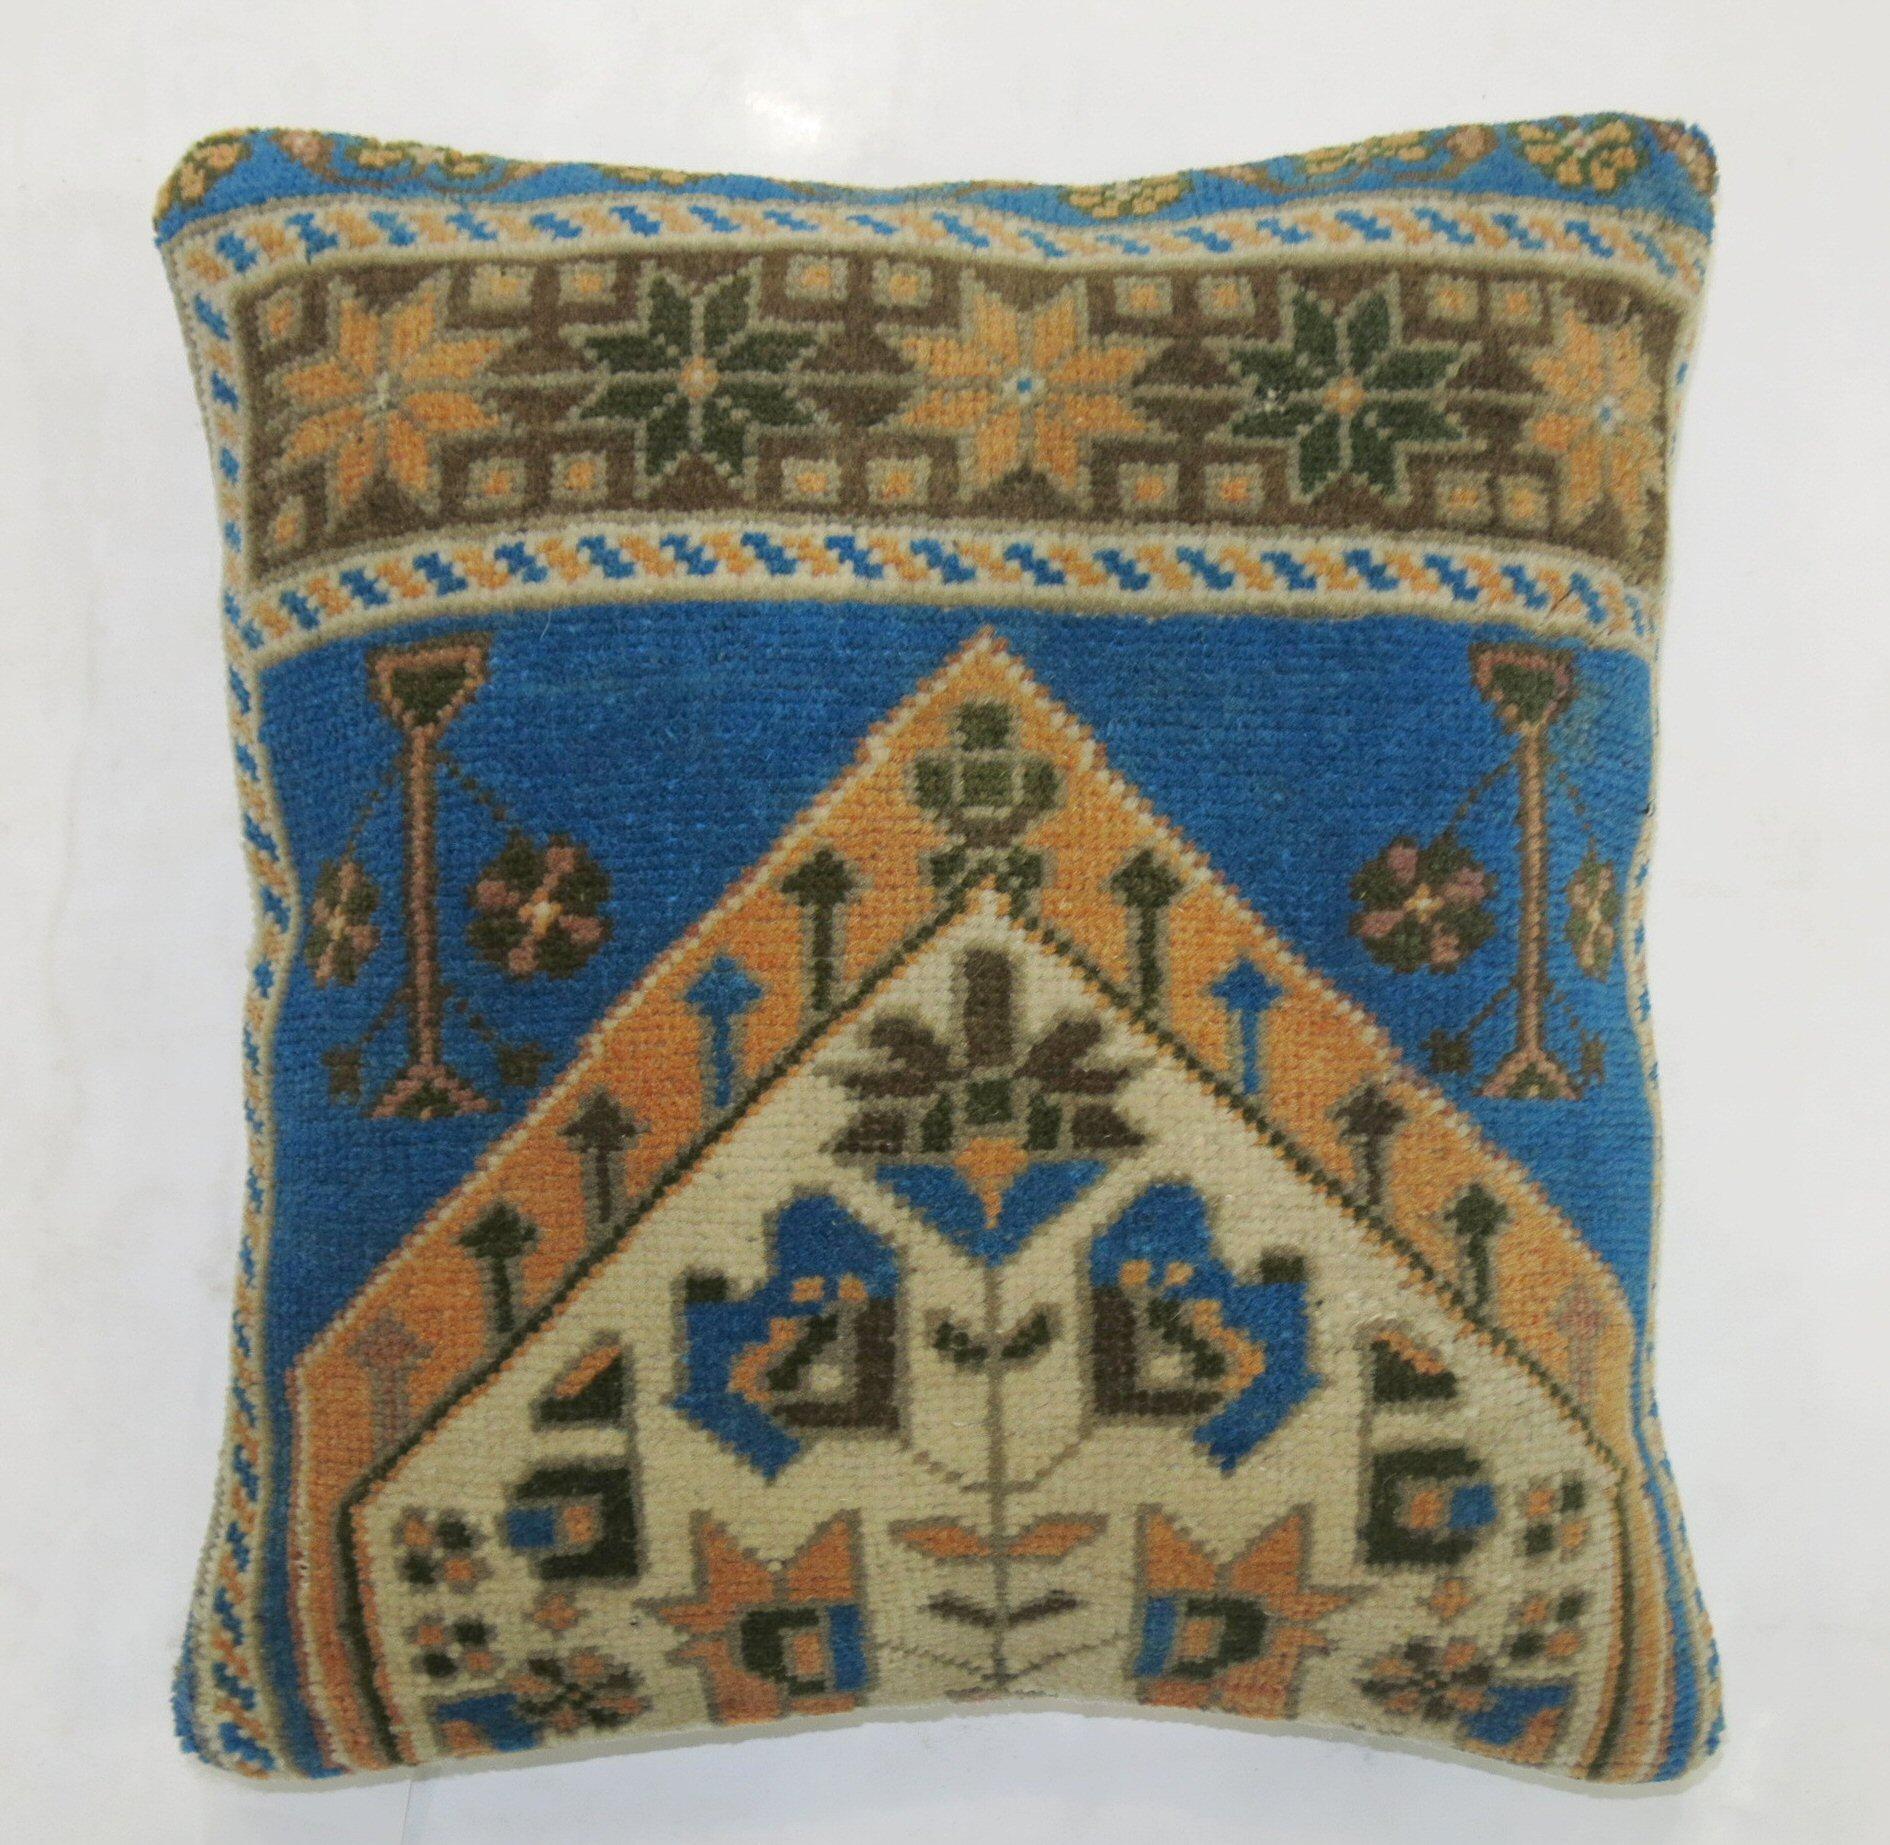 Pillow made from a mid-20th-century Turkish rug

Measures: 17